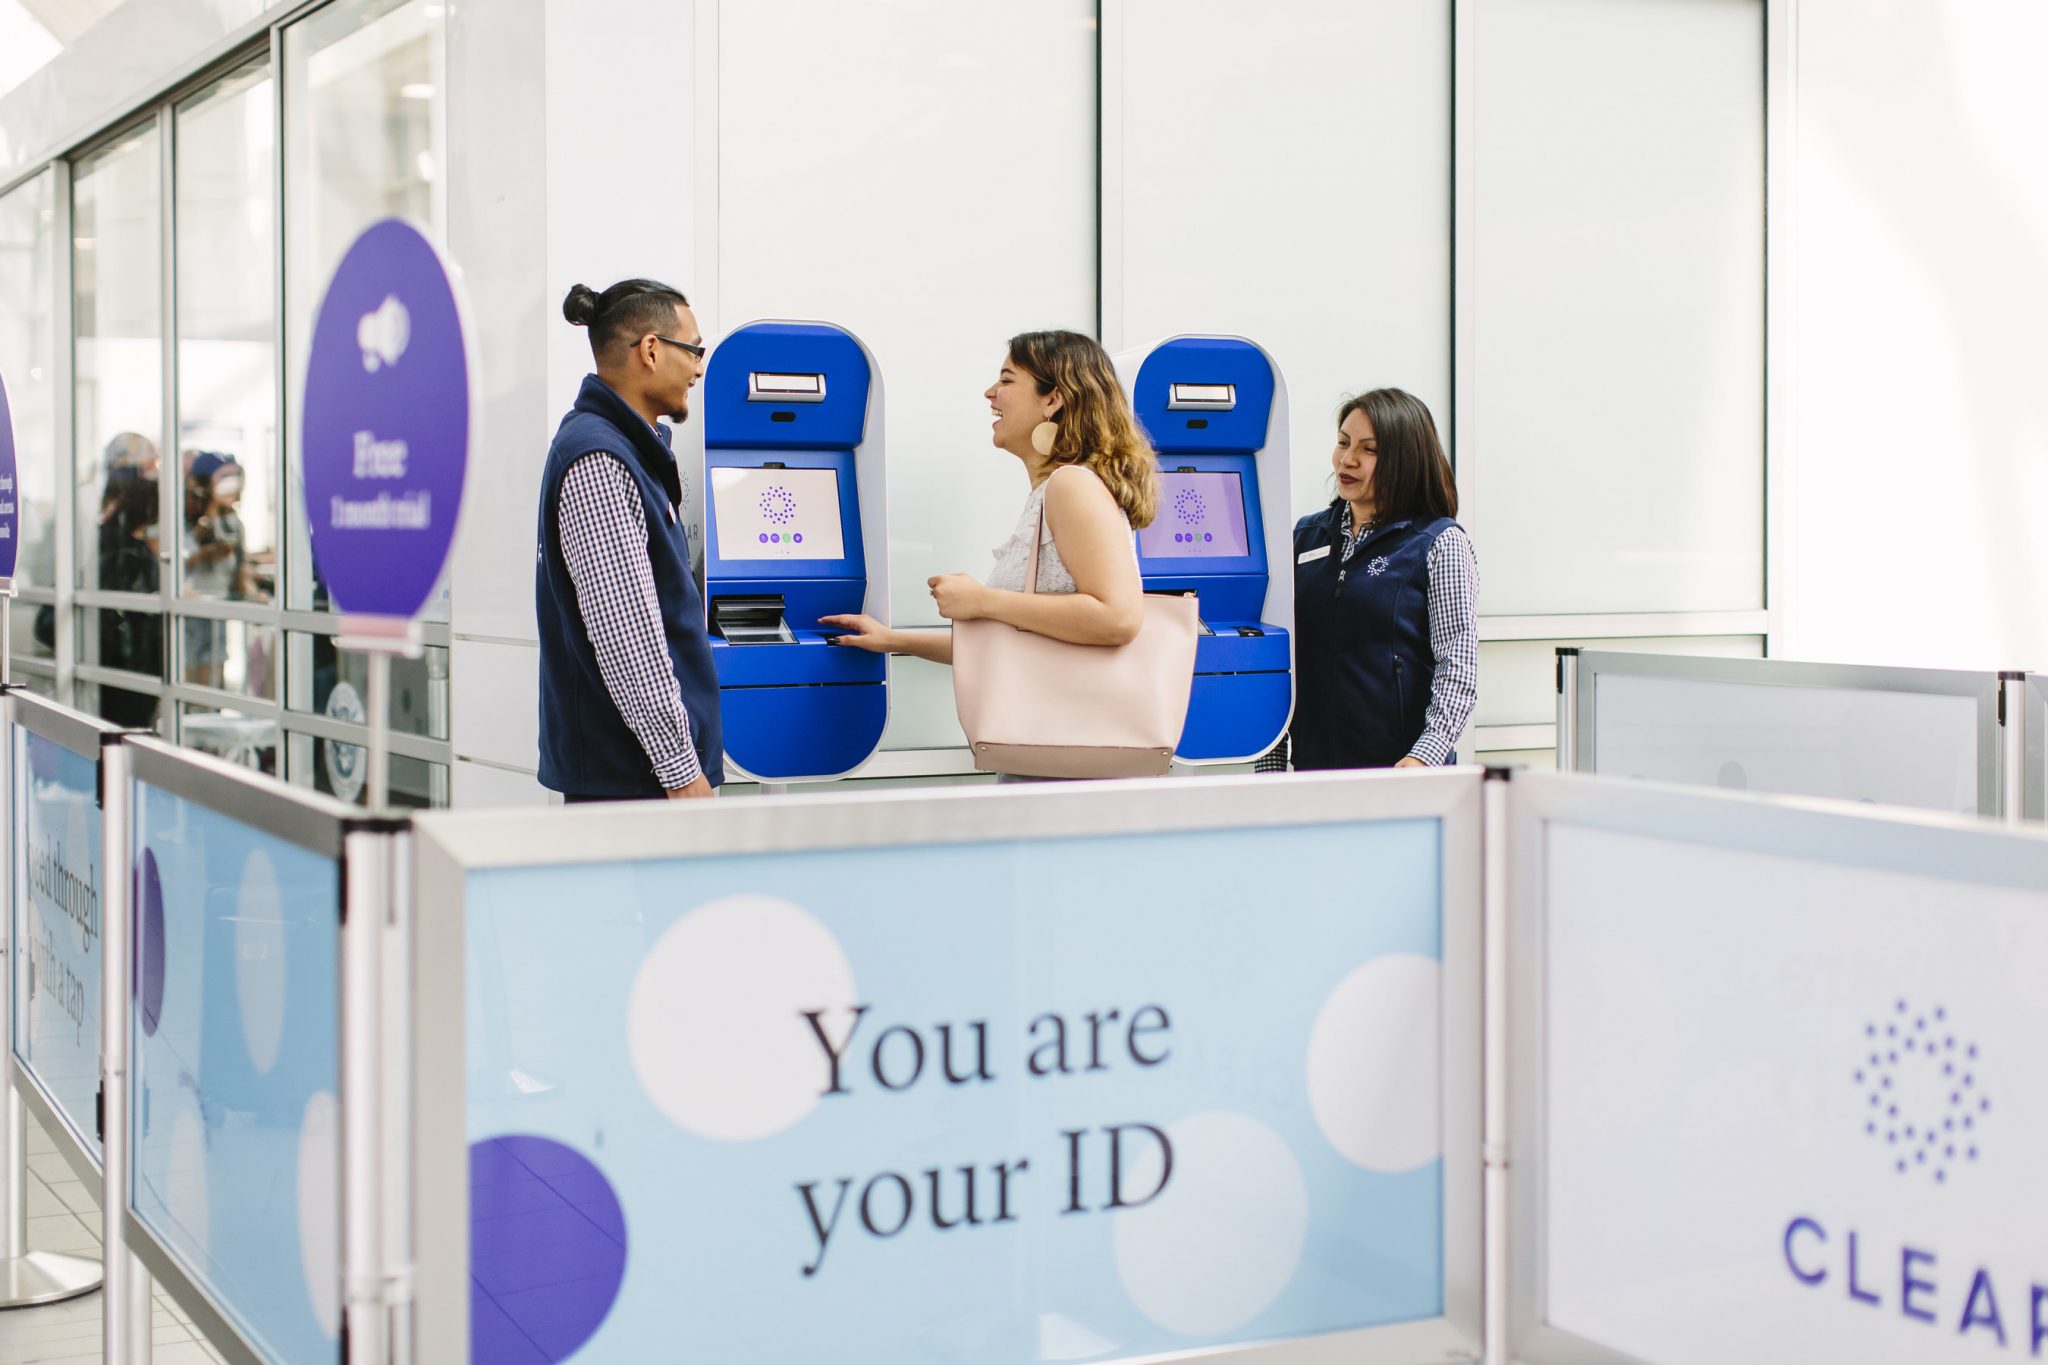 United Airlines offers easier biometric clearance for frequent flyers